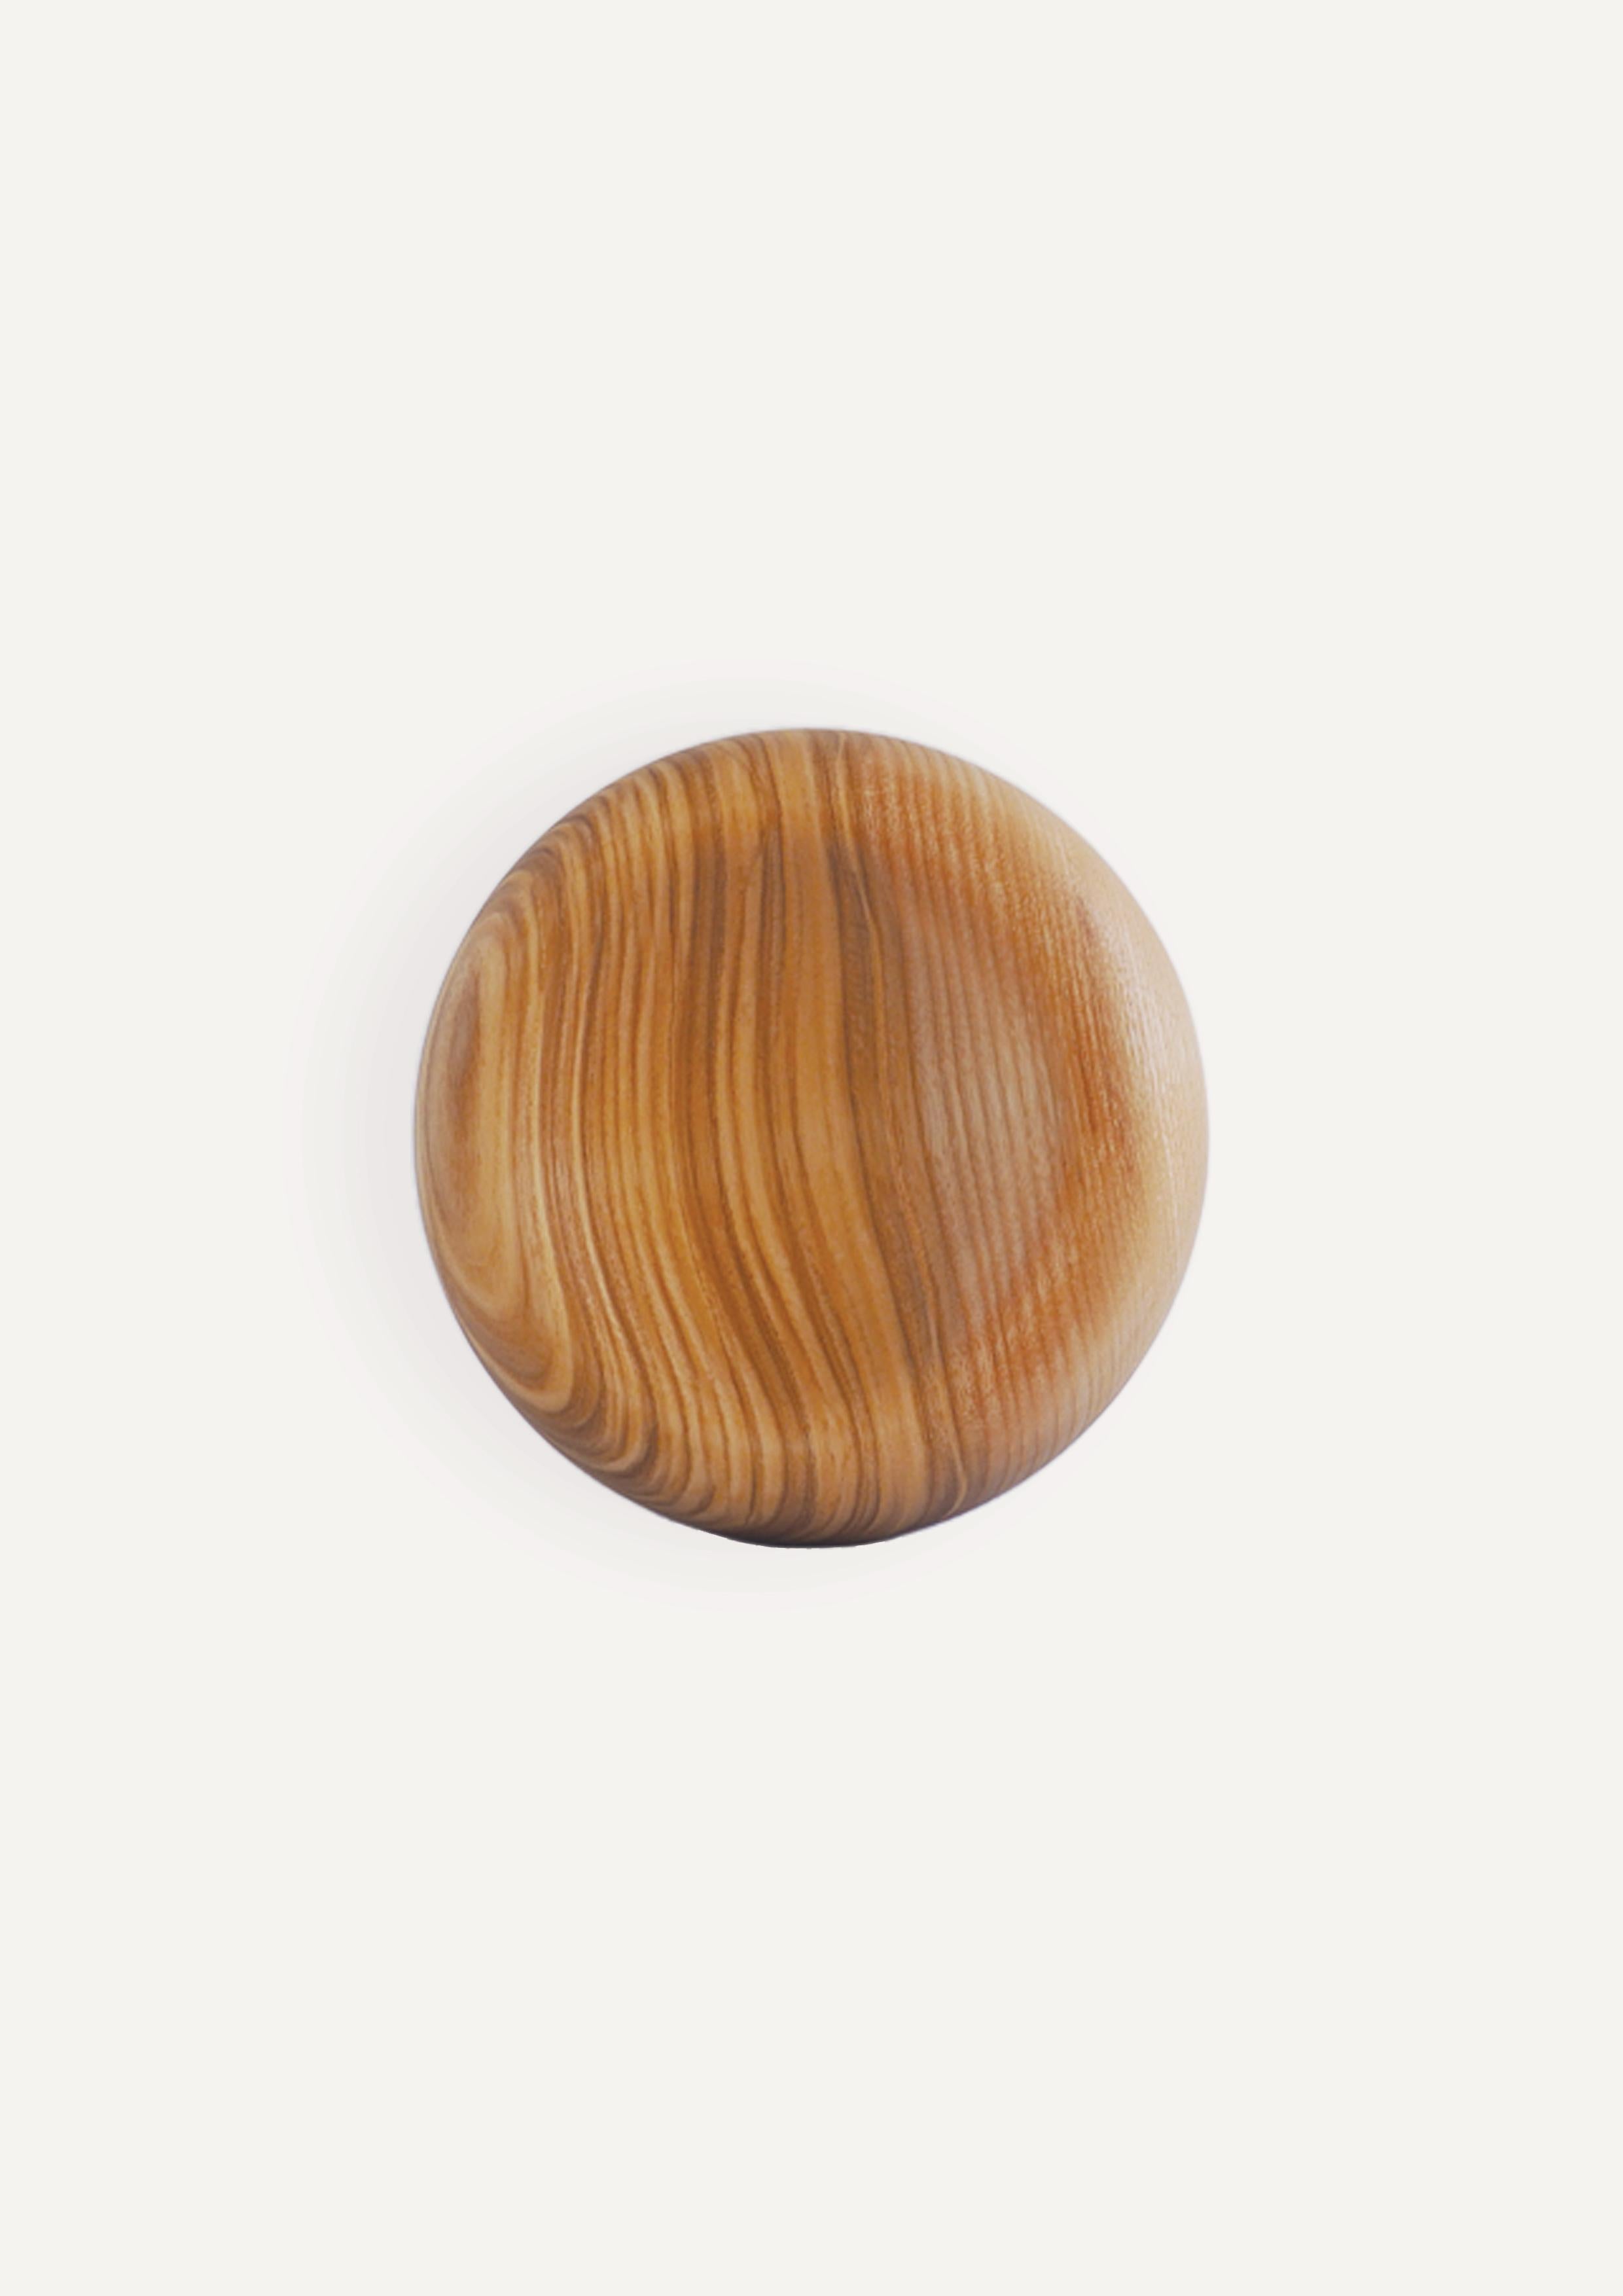 Contemporary Large bowl, ash wood, woodturning, handmade in France, OROS Editions  For Sale